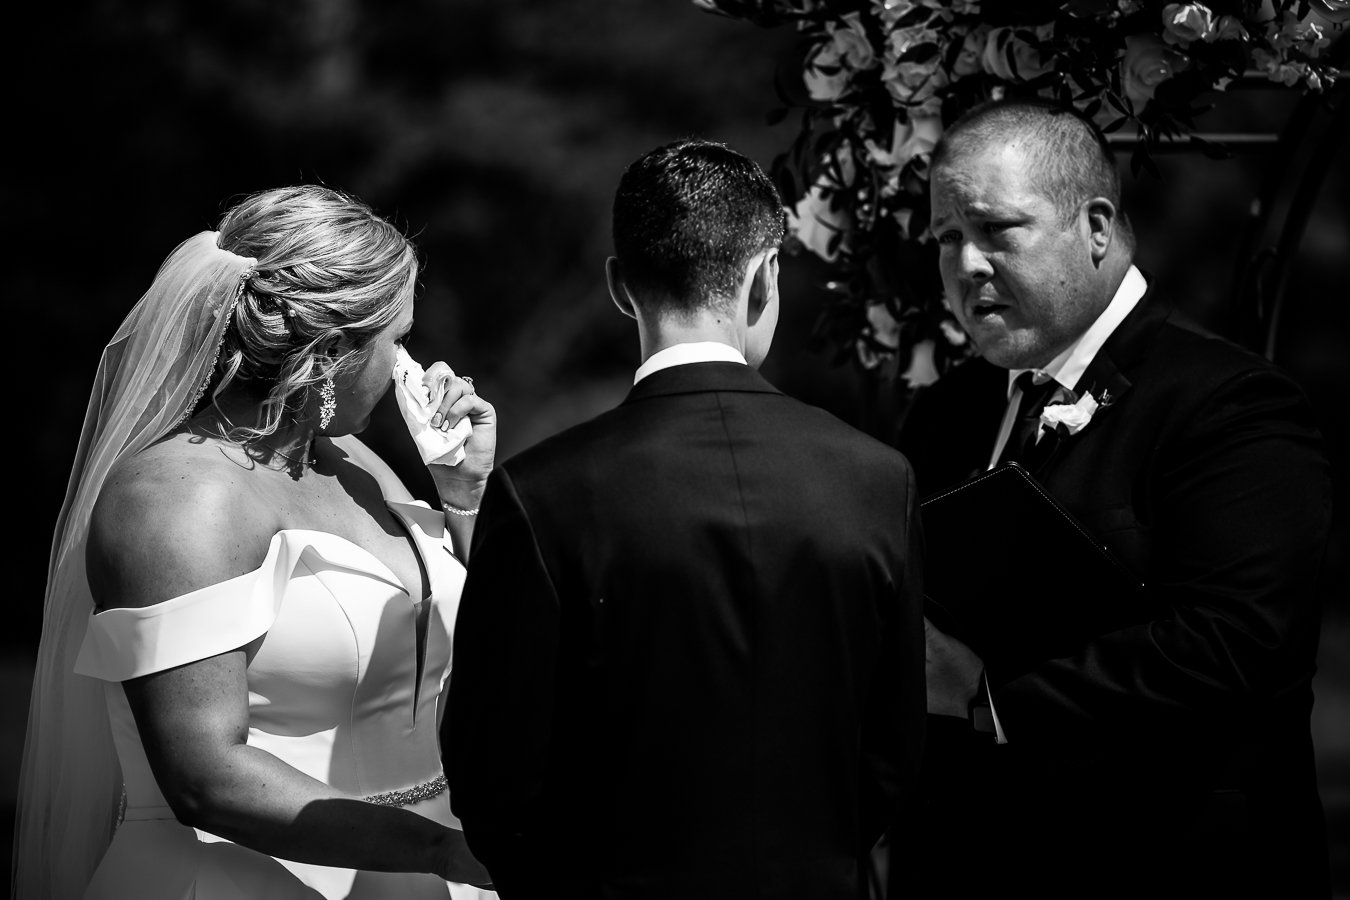 authentic virginia wedding photographer, lisa rhinehart, captures this authentic image of the bride as she wipes tears away with a tissue during their vows 